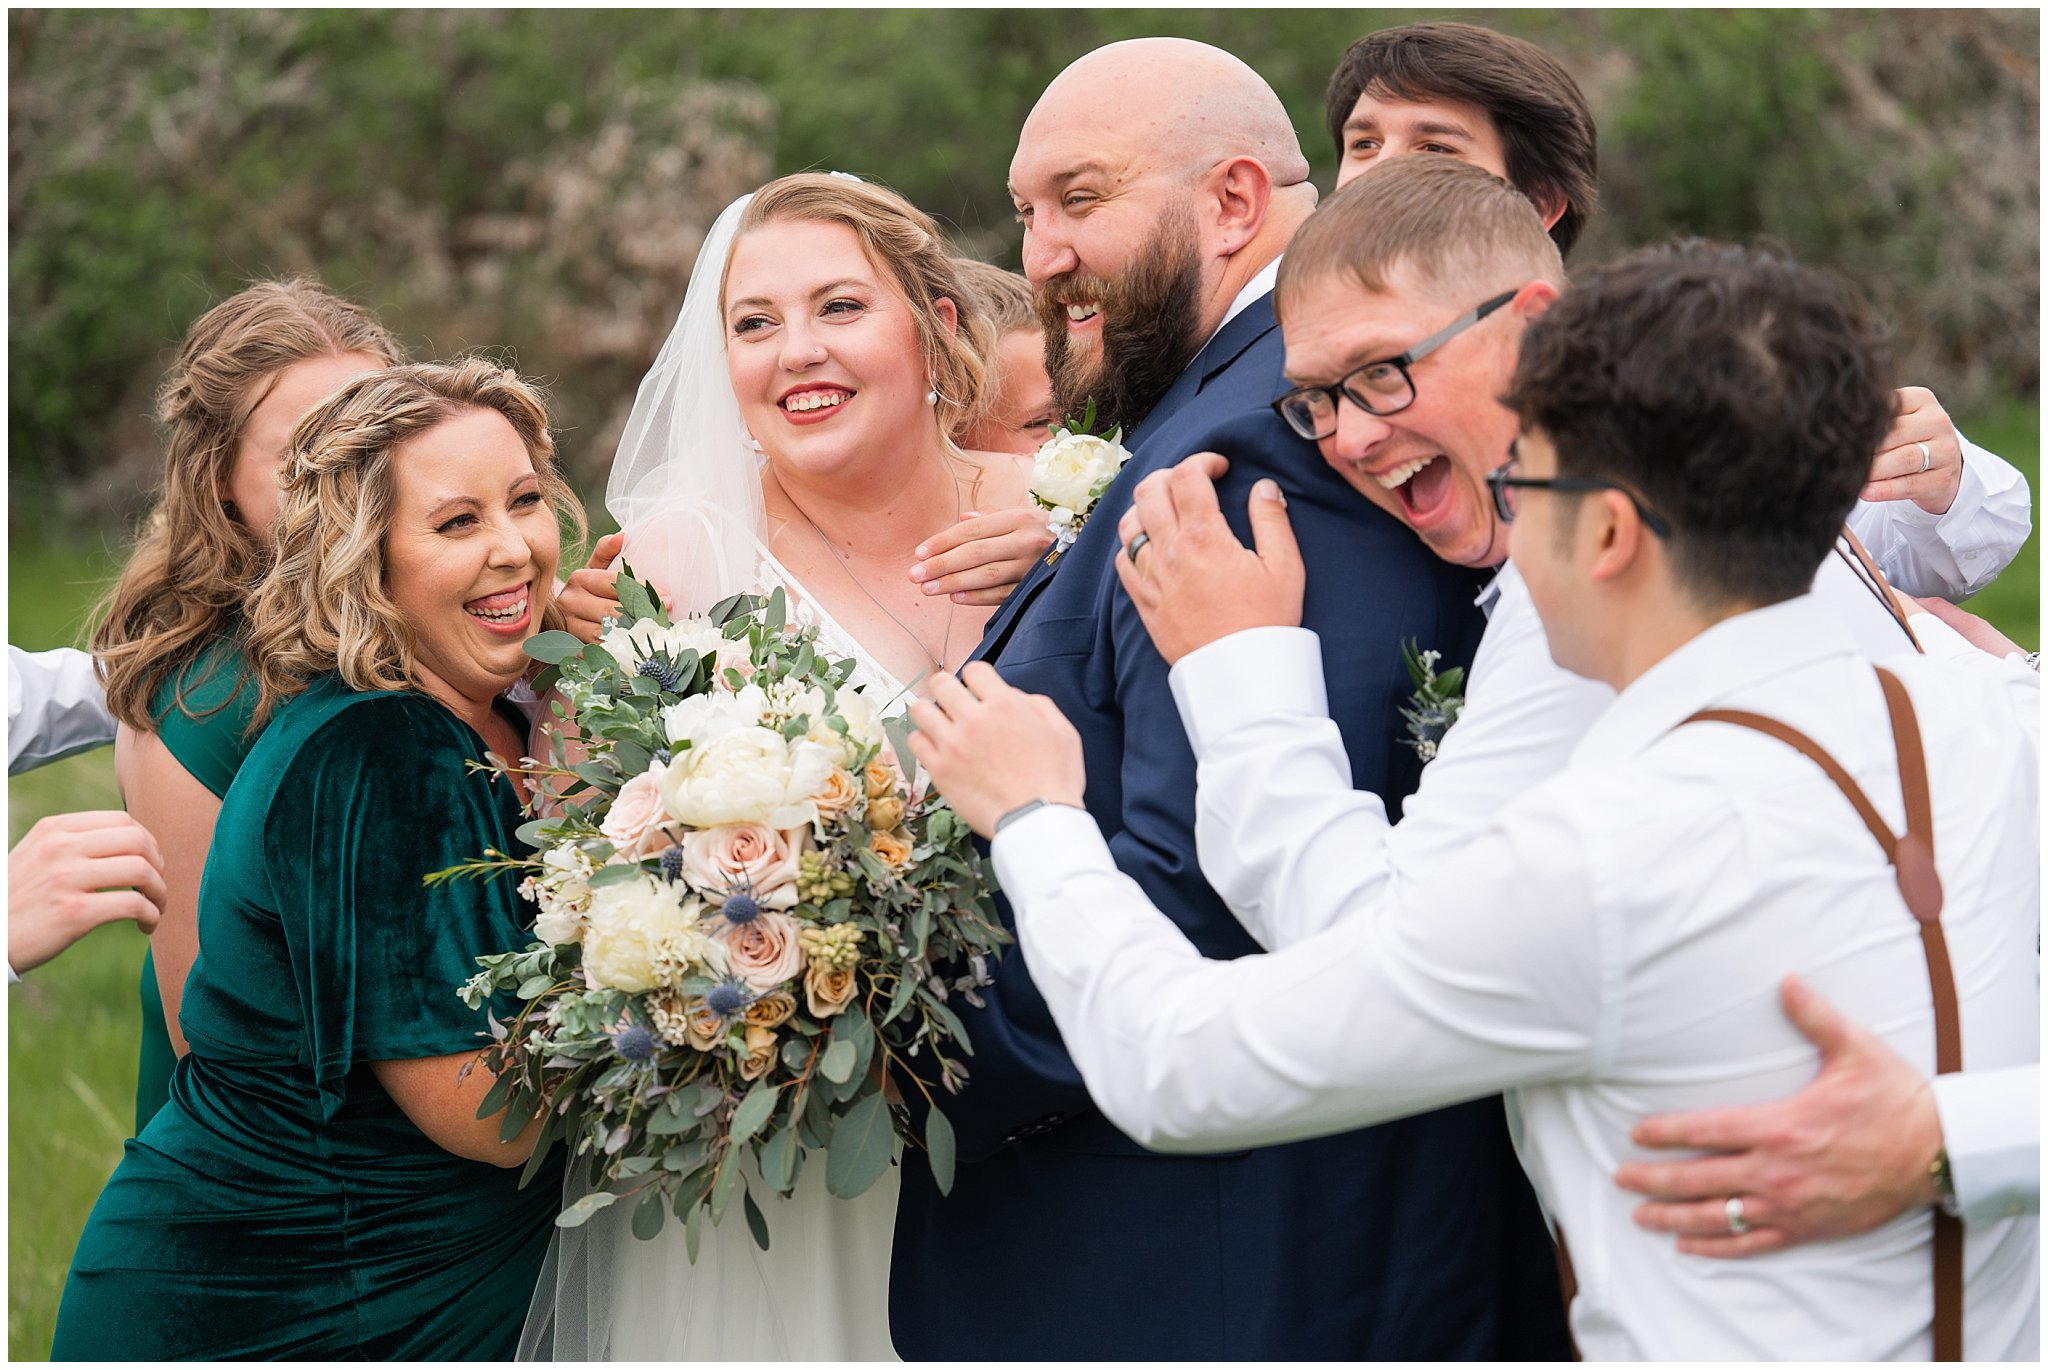 Wedding party portraits in the mountains | Spring Mountain Wedding at Oak Hills Utah